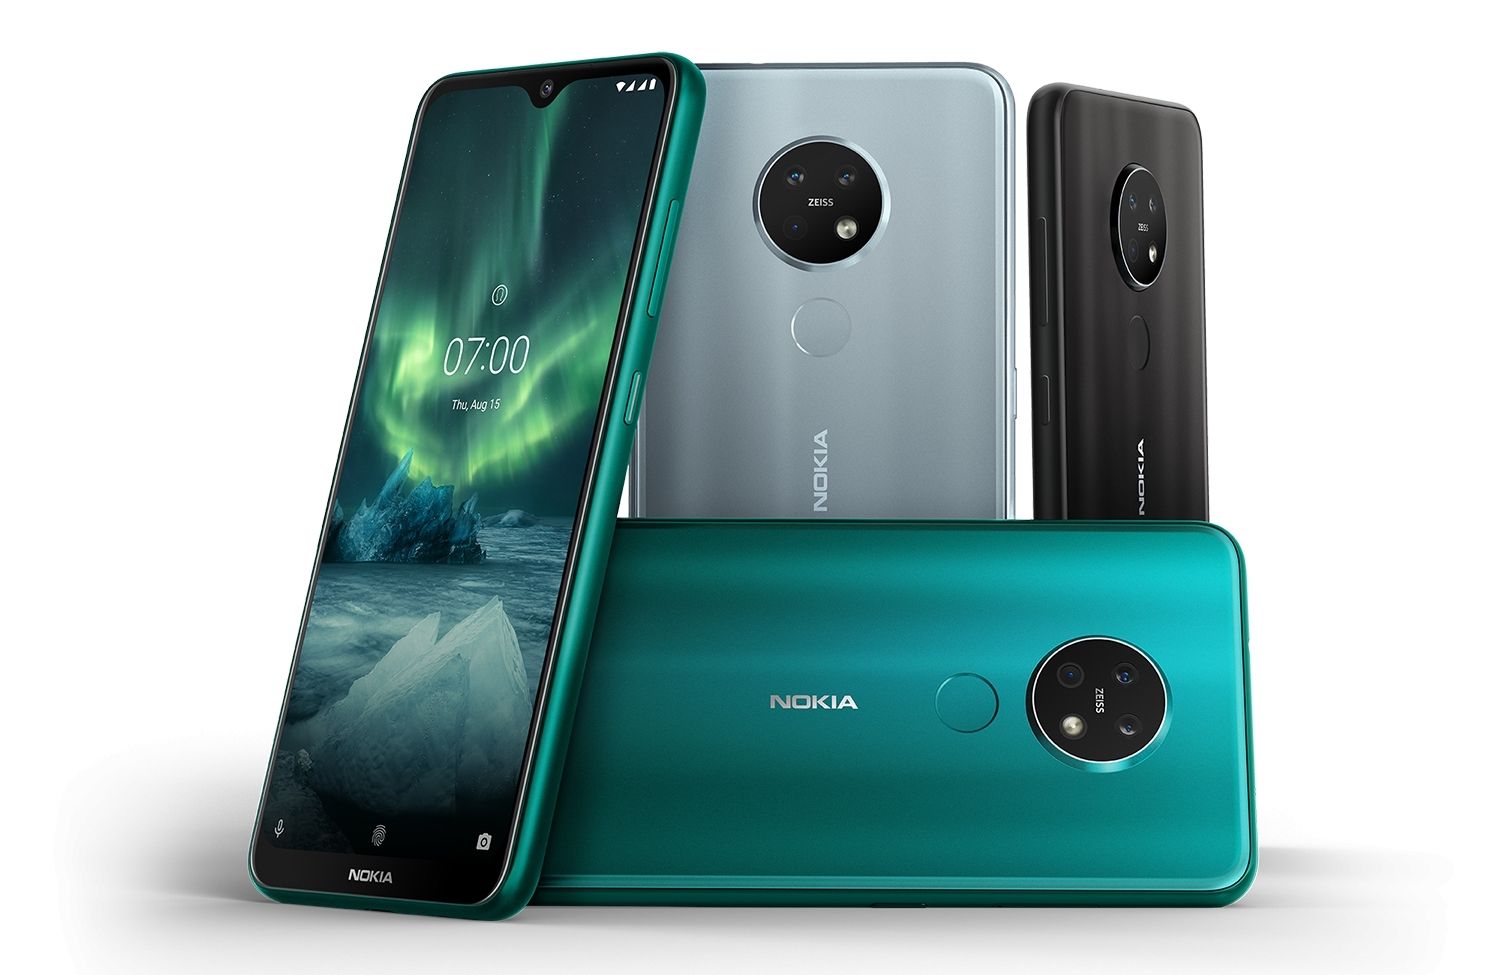 HMD Global, the home of Nokia phones, brings Snake to the masses